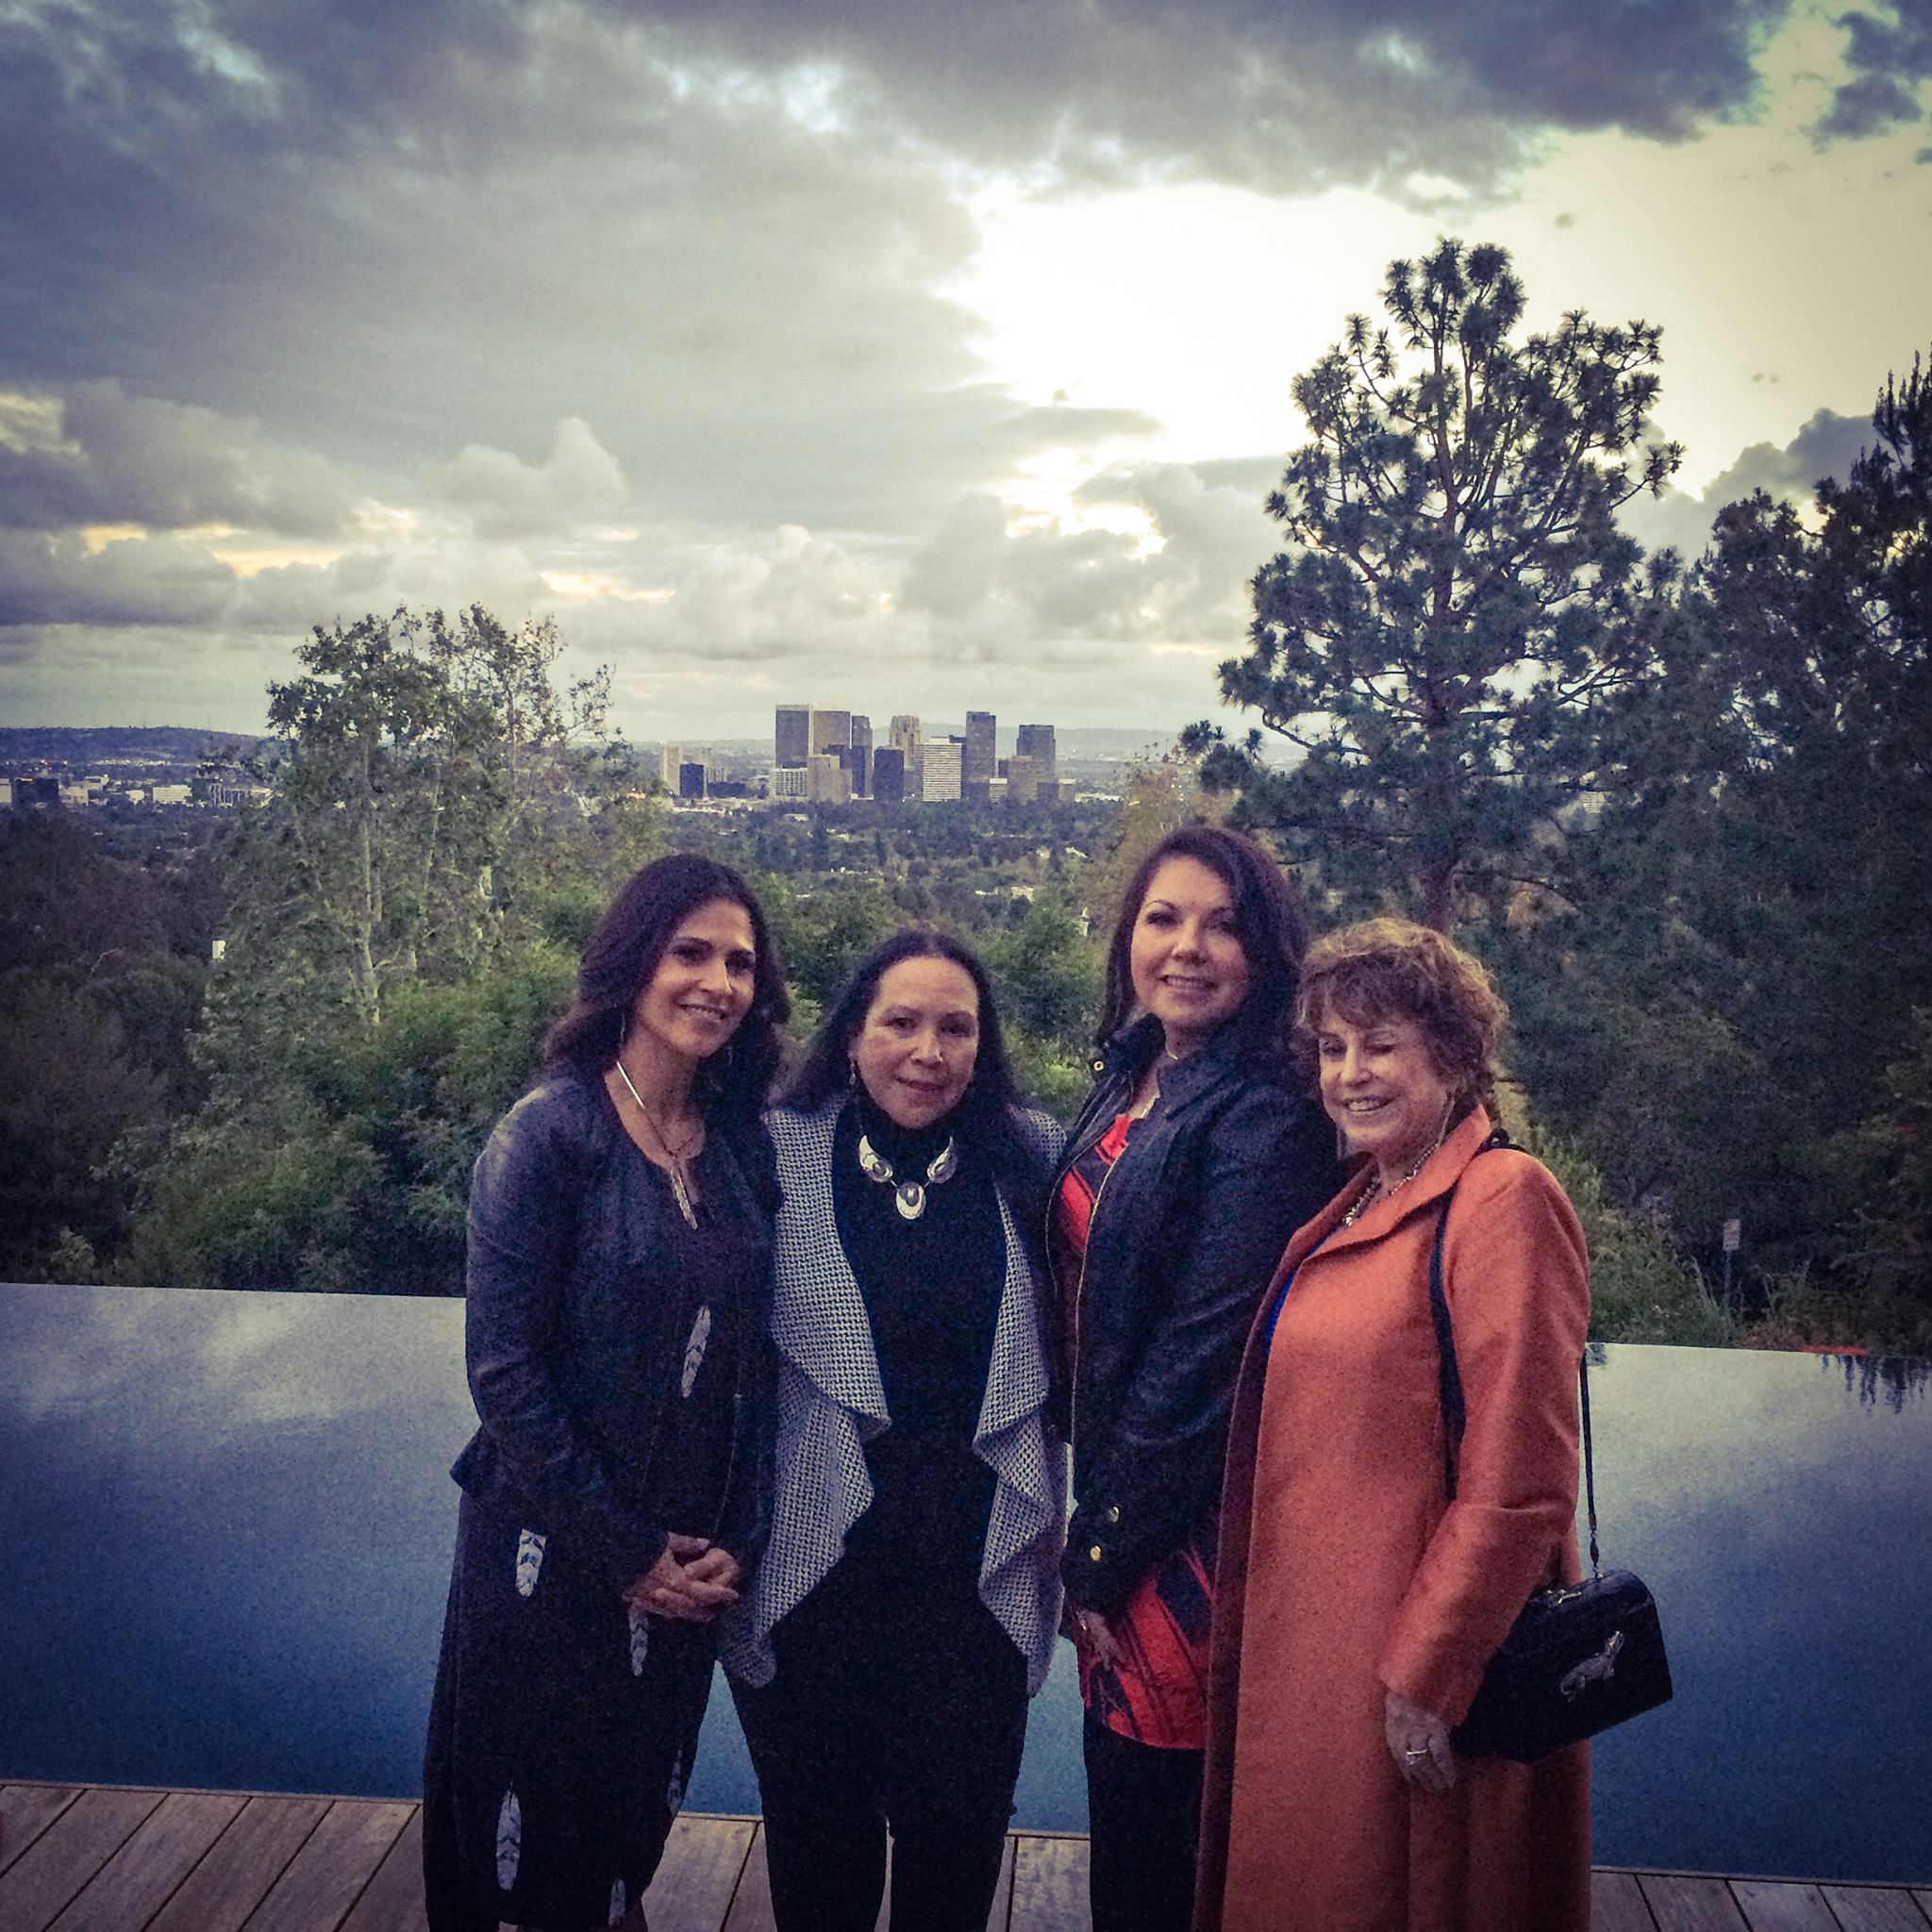 CSUSM Tribal Liaison Tishmall Turner and CICSC Director Dr. Joely Proudfit standing with two other women in front of an infinity pool that overlooks trees and a metropolitan city in the distance